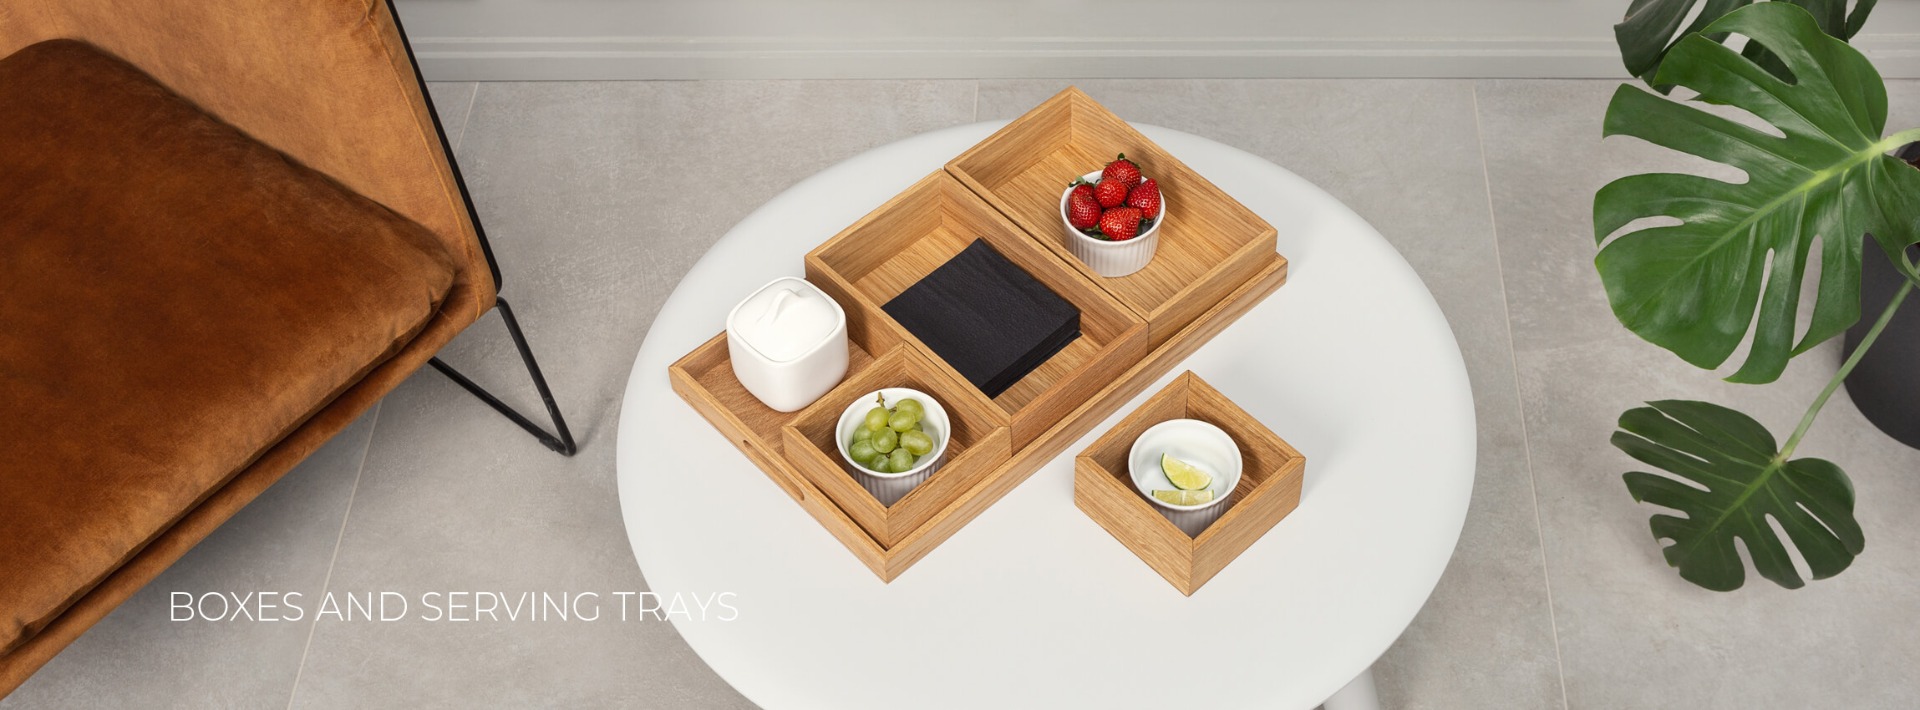 Boxes and serving trays